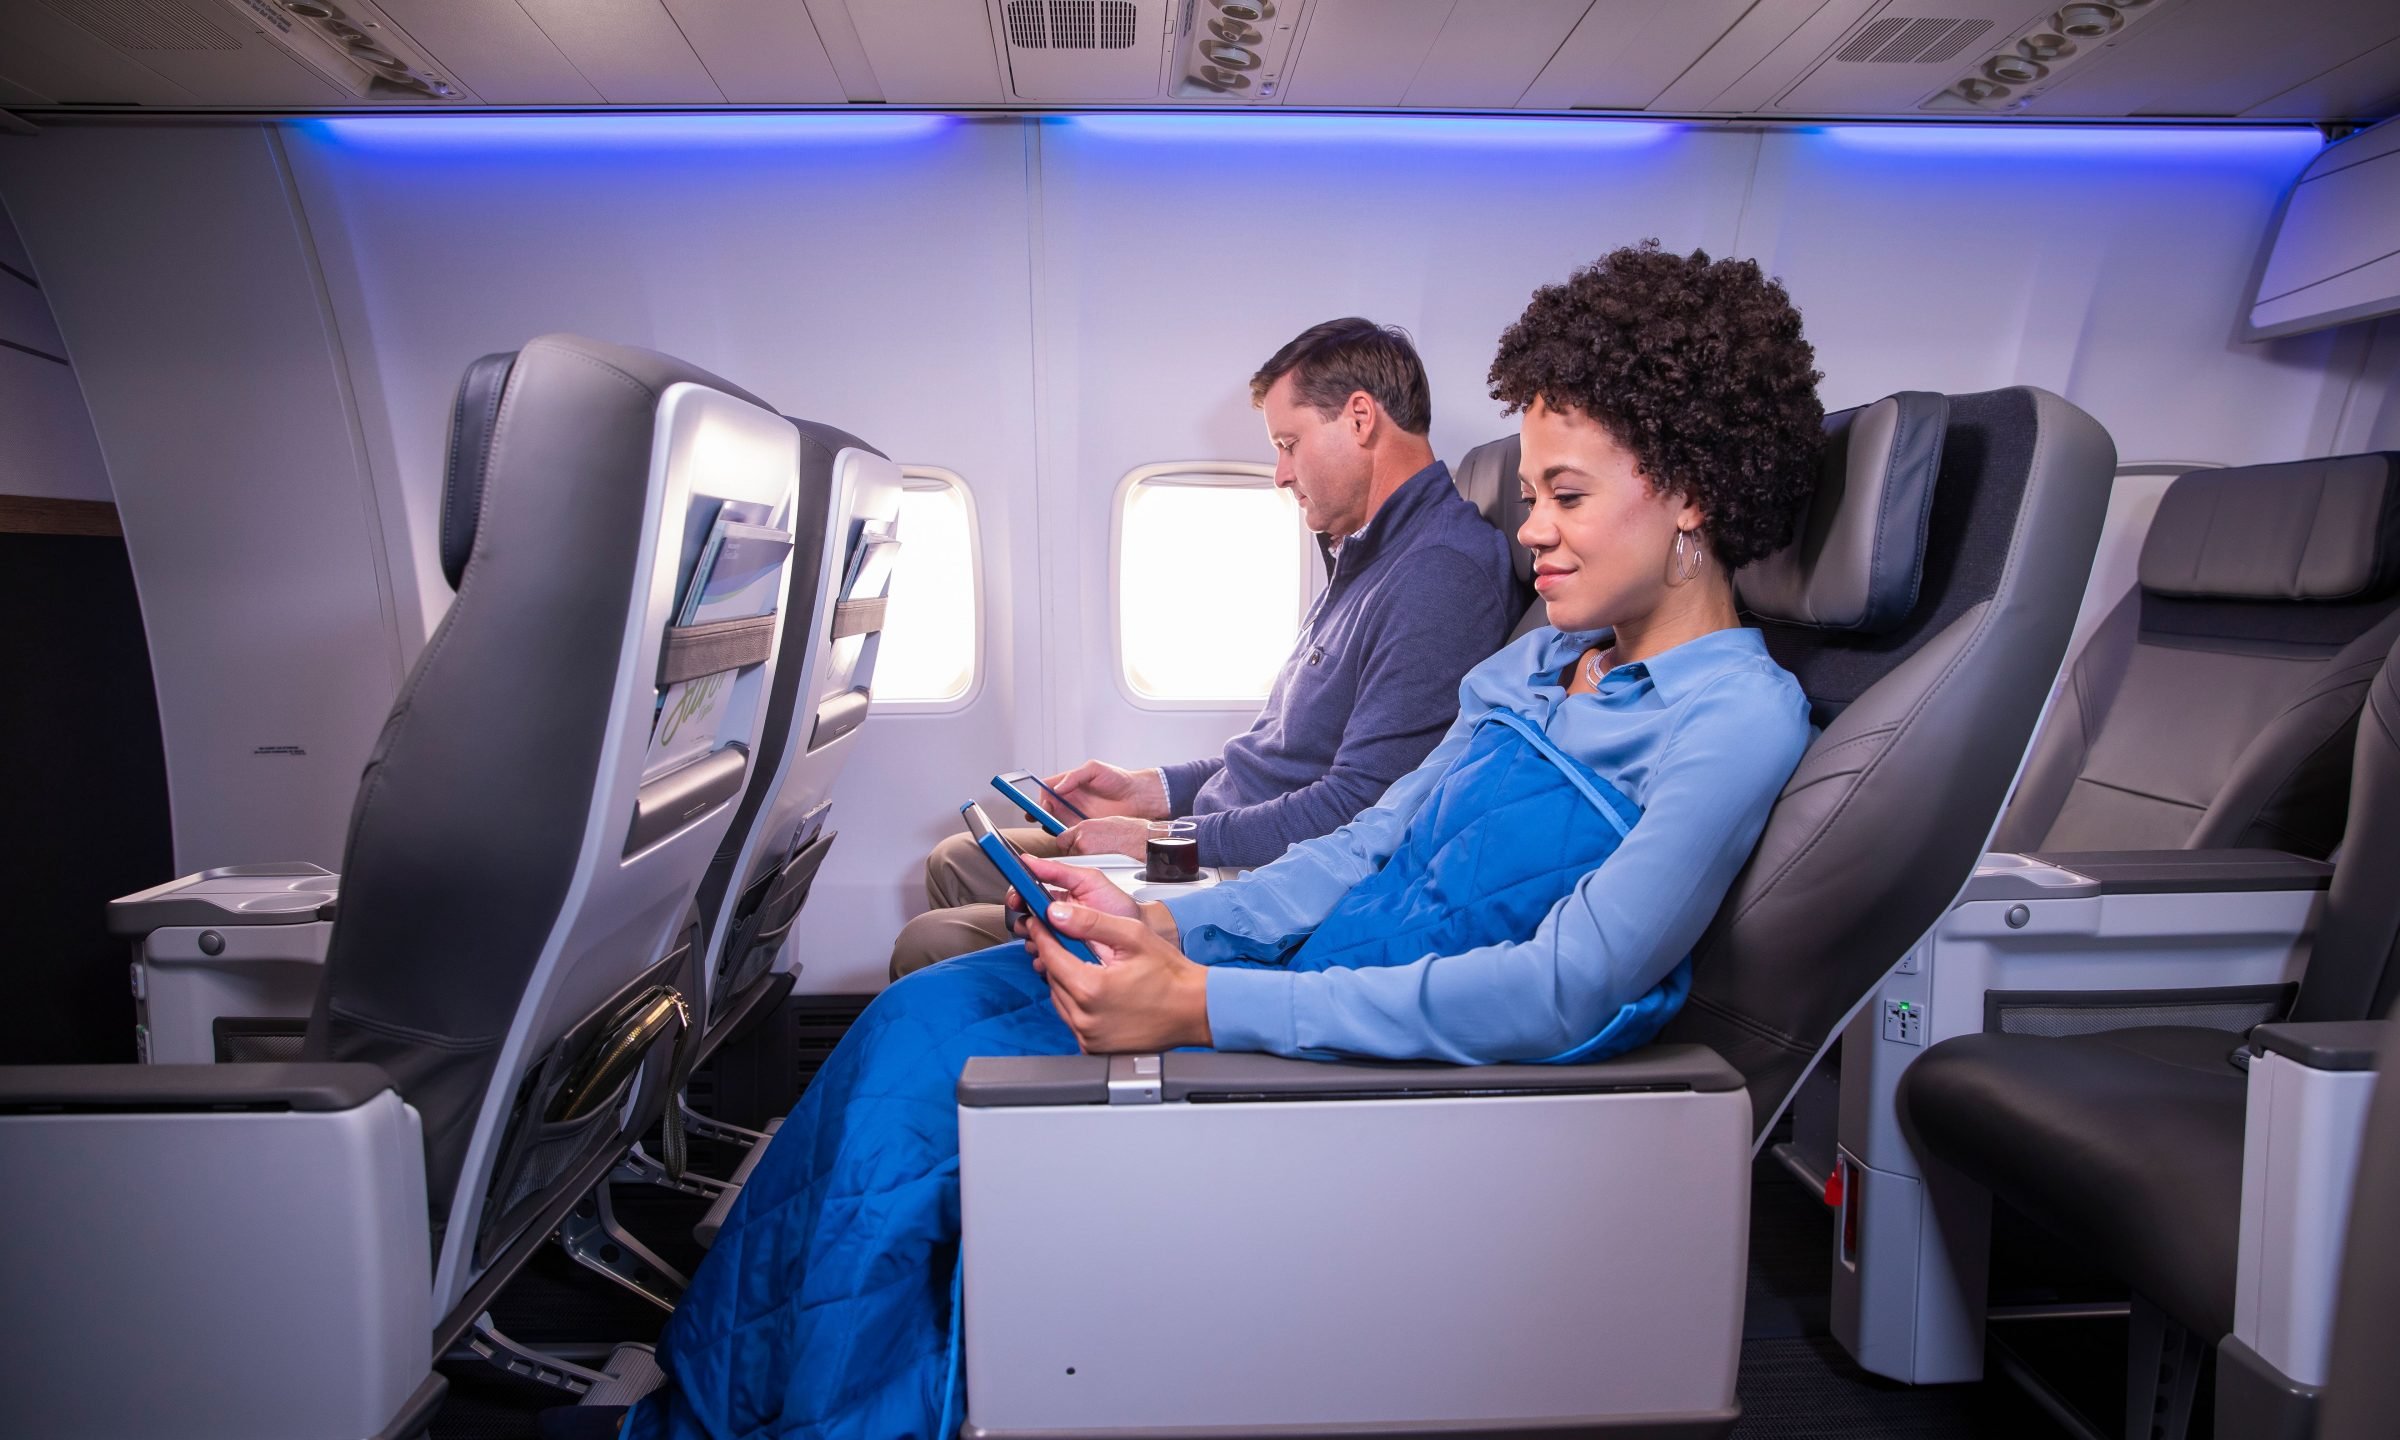 Ask High Tech Flight  What's a Cross-Check? Learn the airline